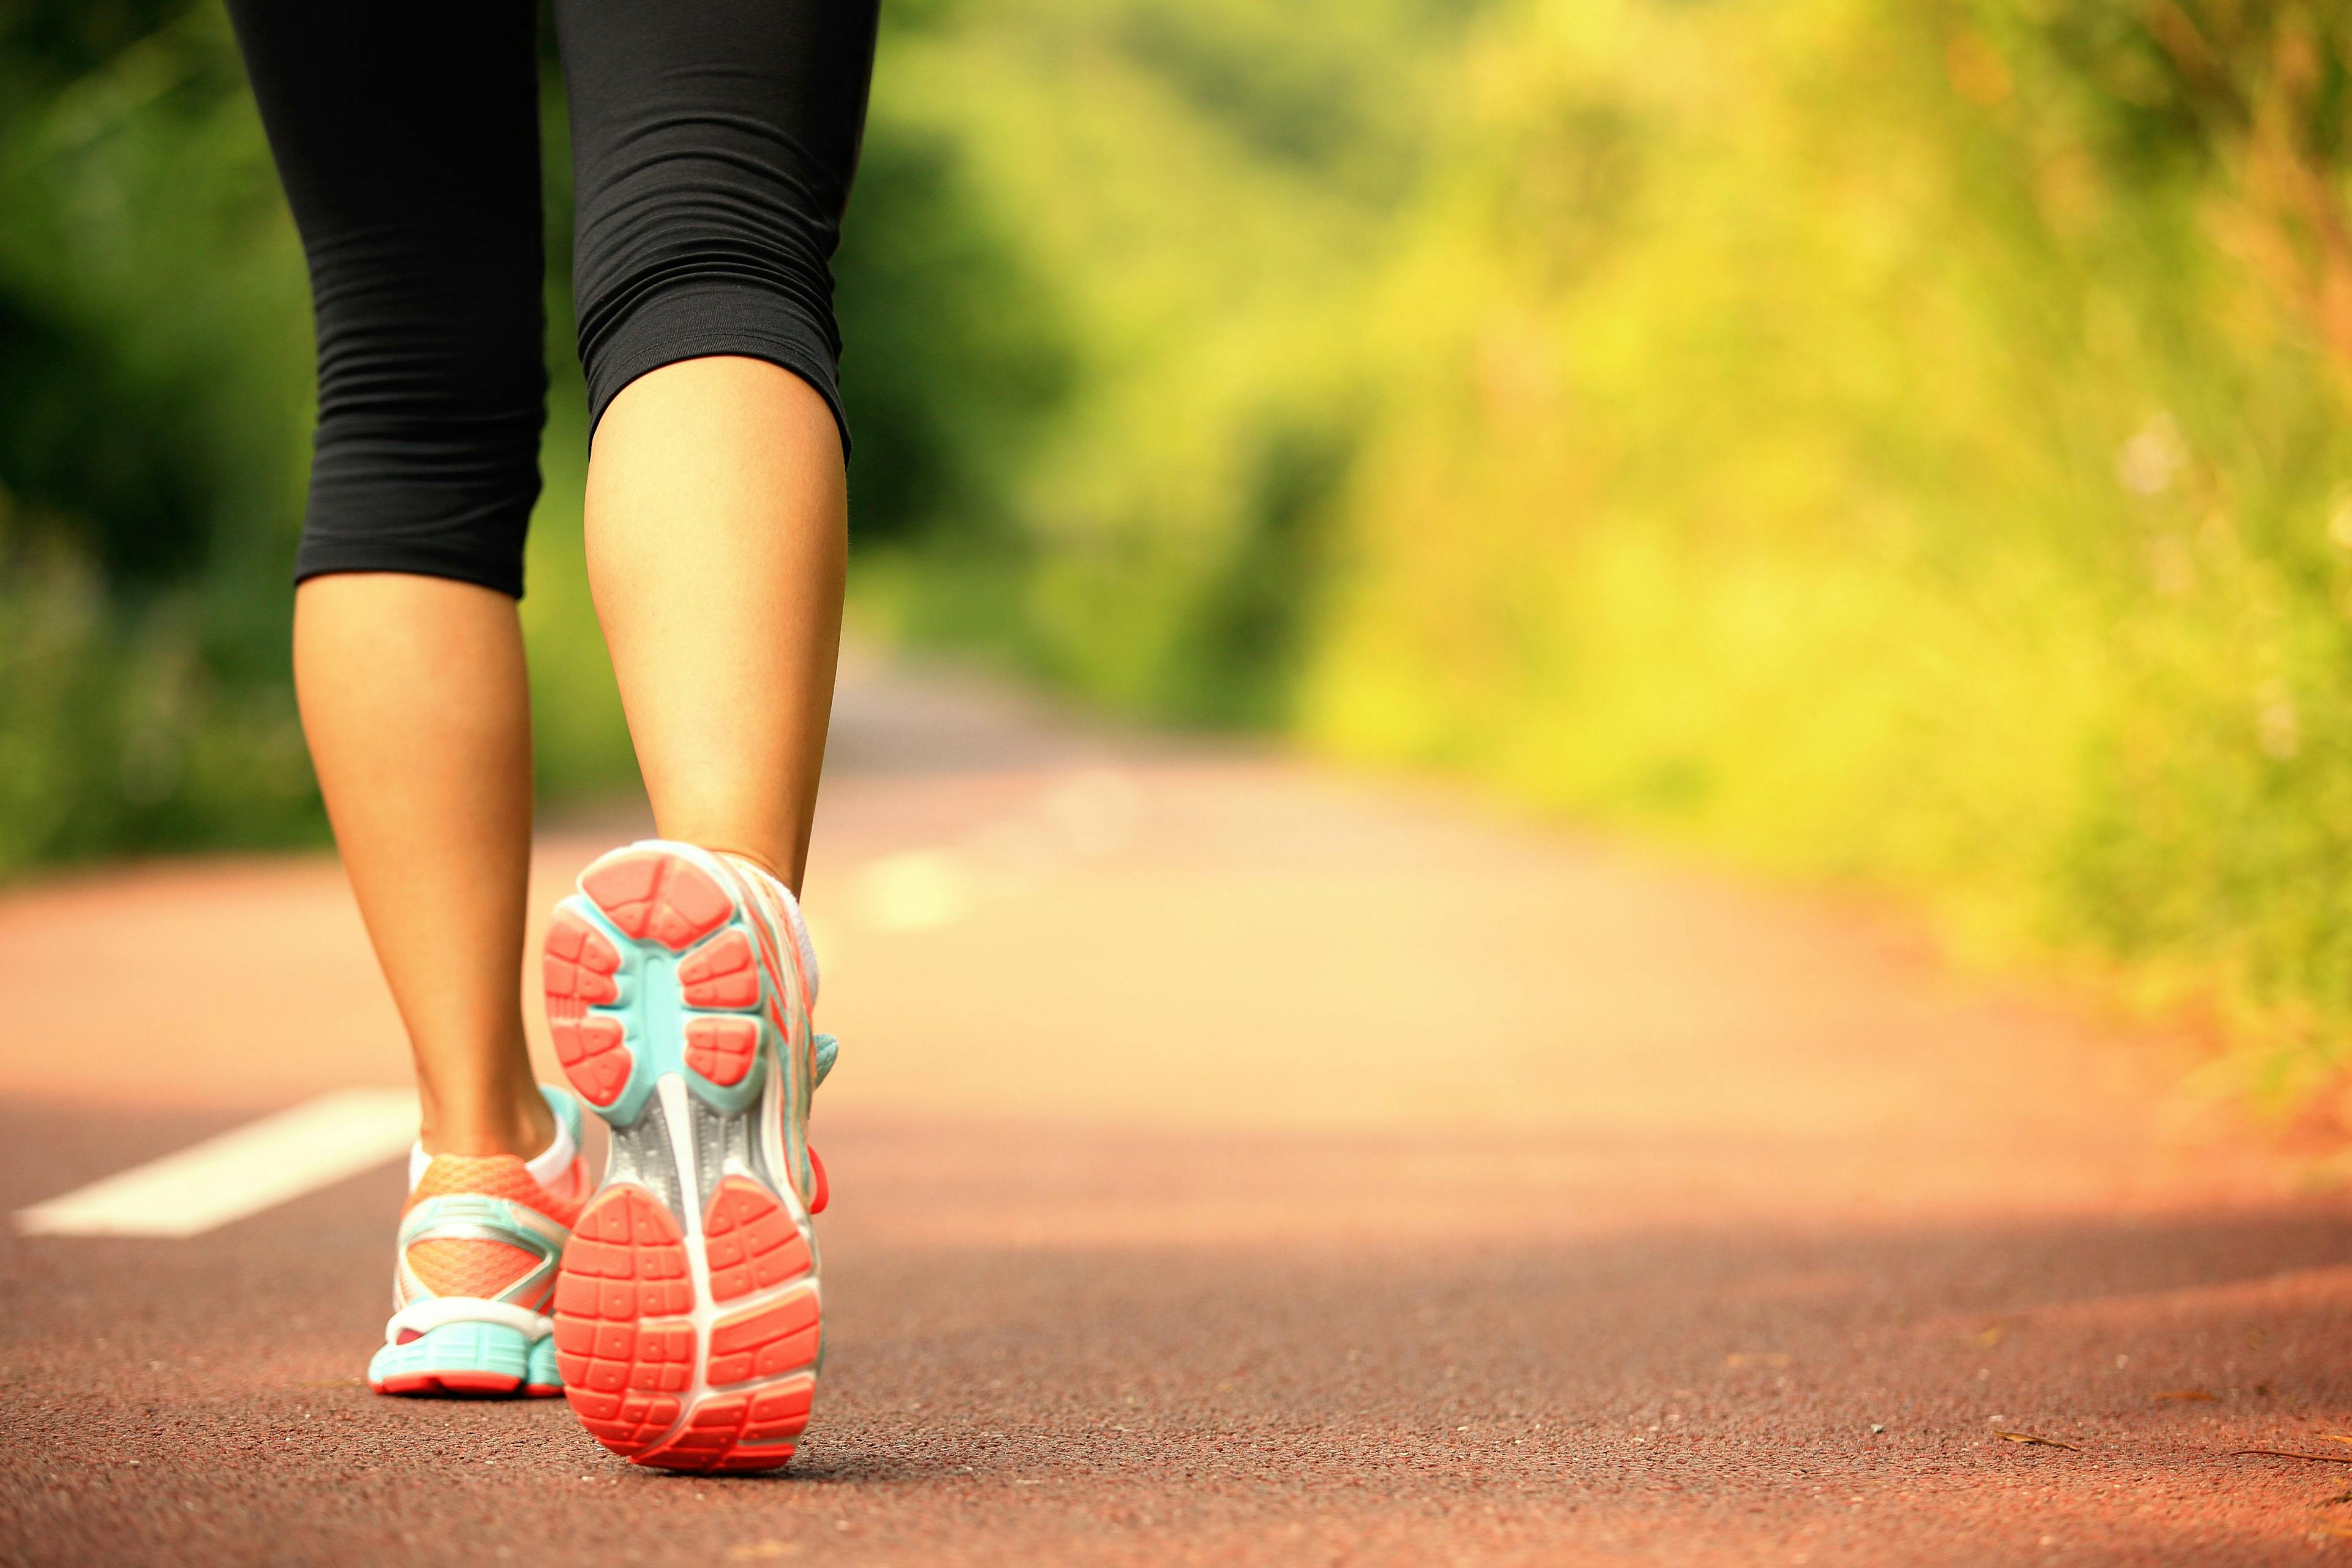 Walking at Faster Speeds Could Significantly Reduce Type 2 Diabetes Risk